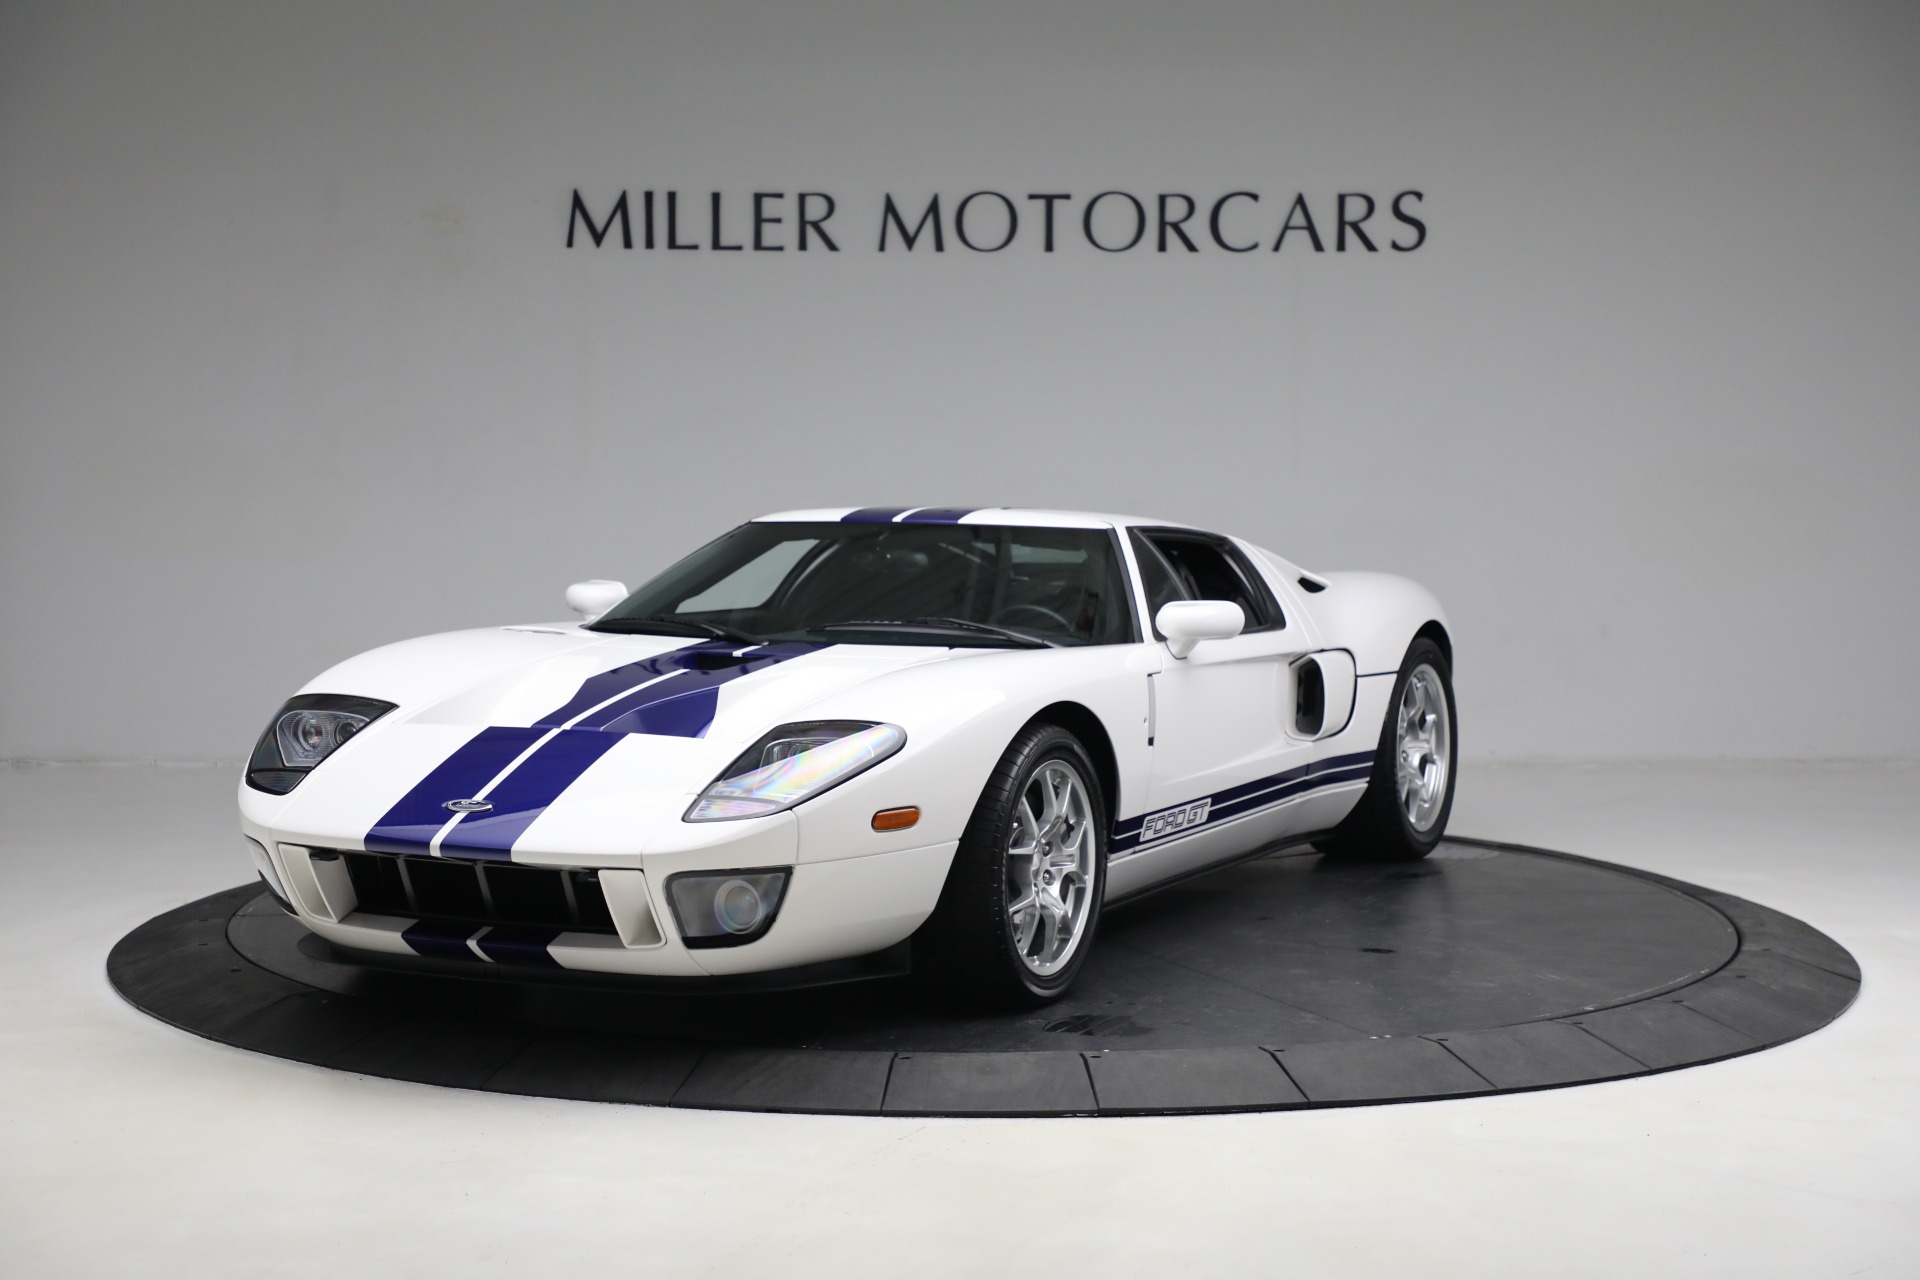 Used 2006 Ford GT for sale $449,900 at McLaren Greenwich in Greenwich CT 06830 1